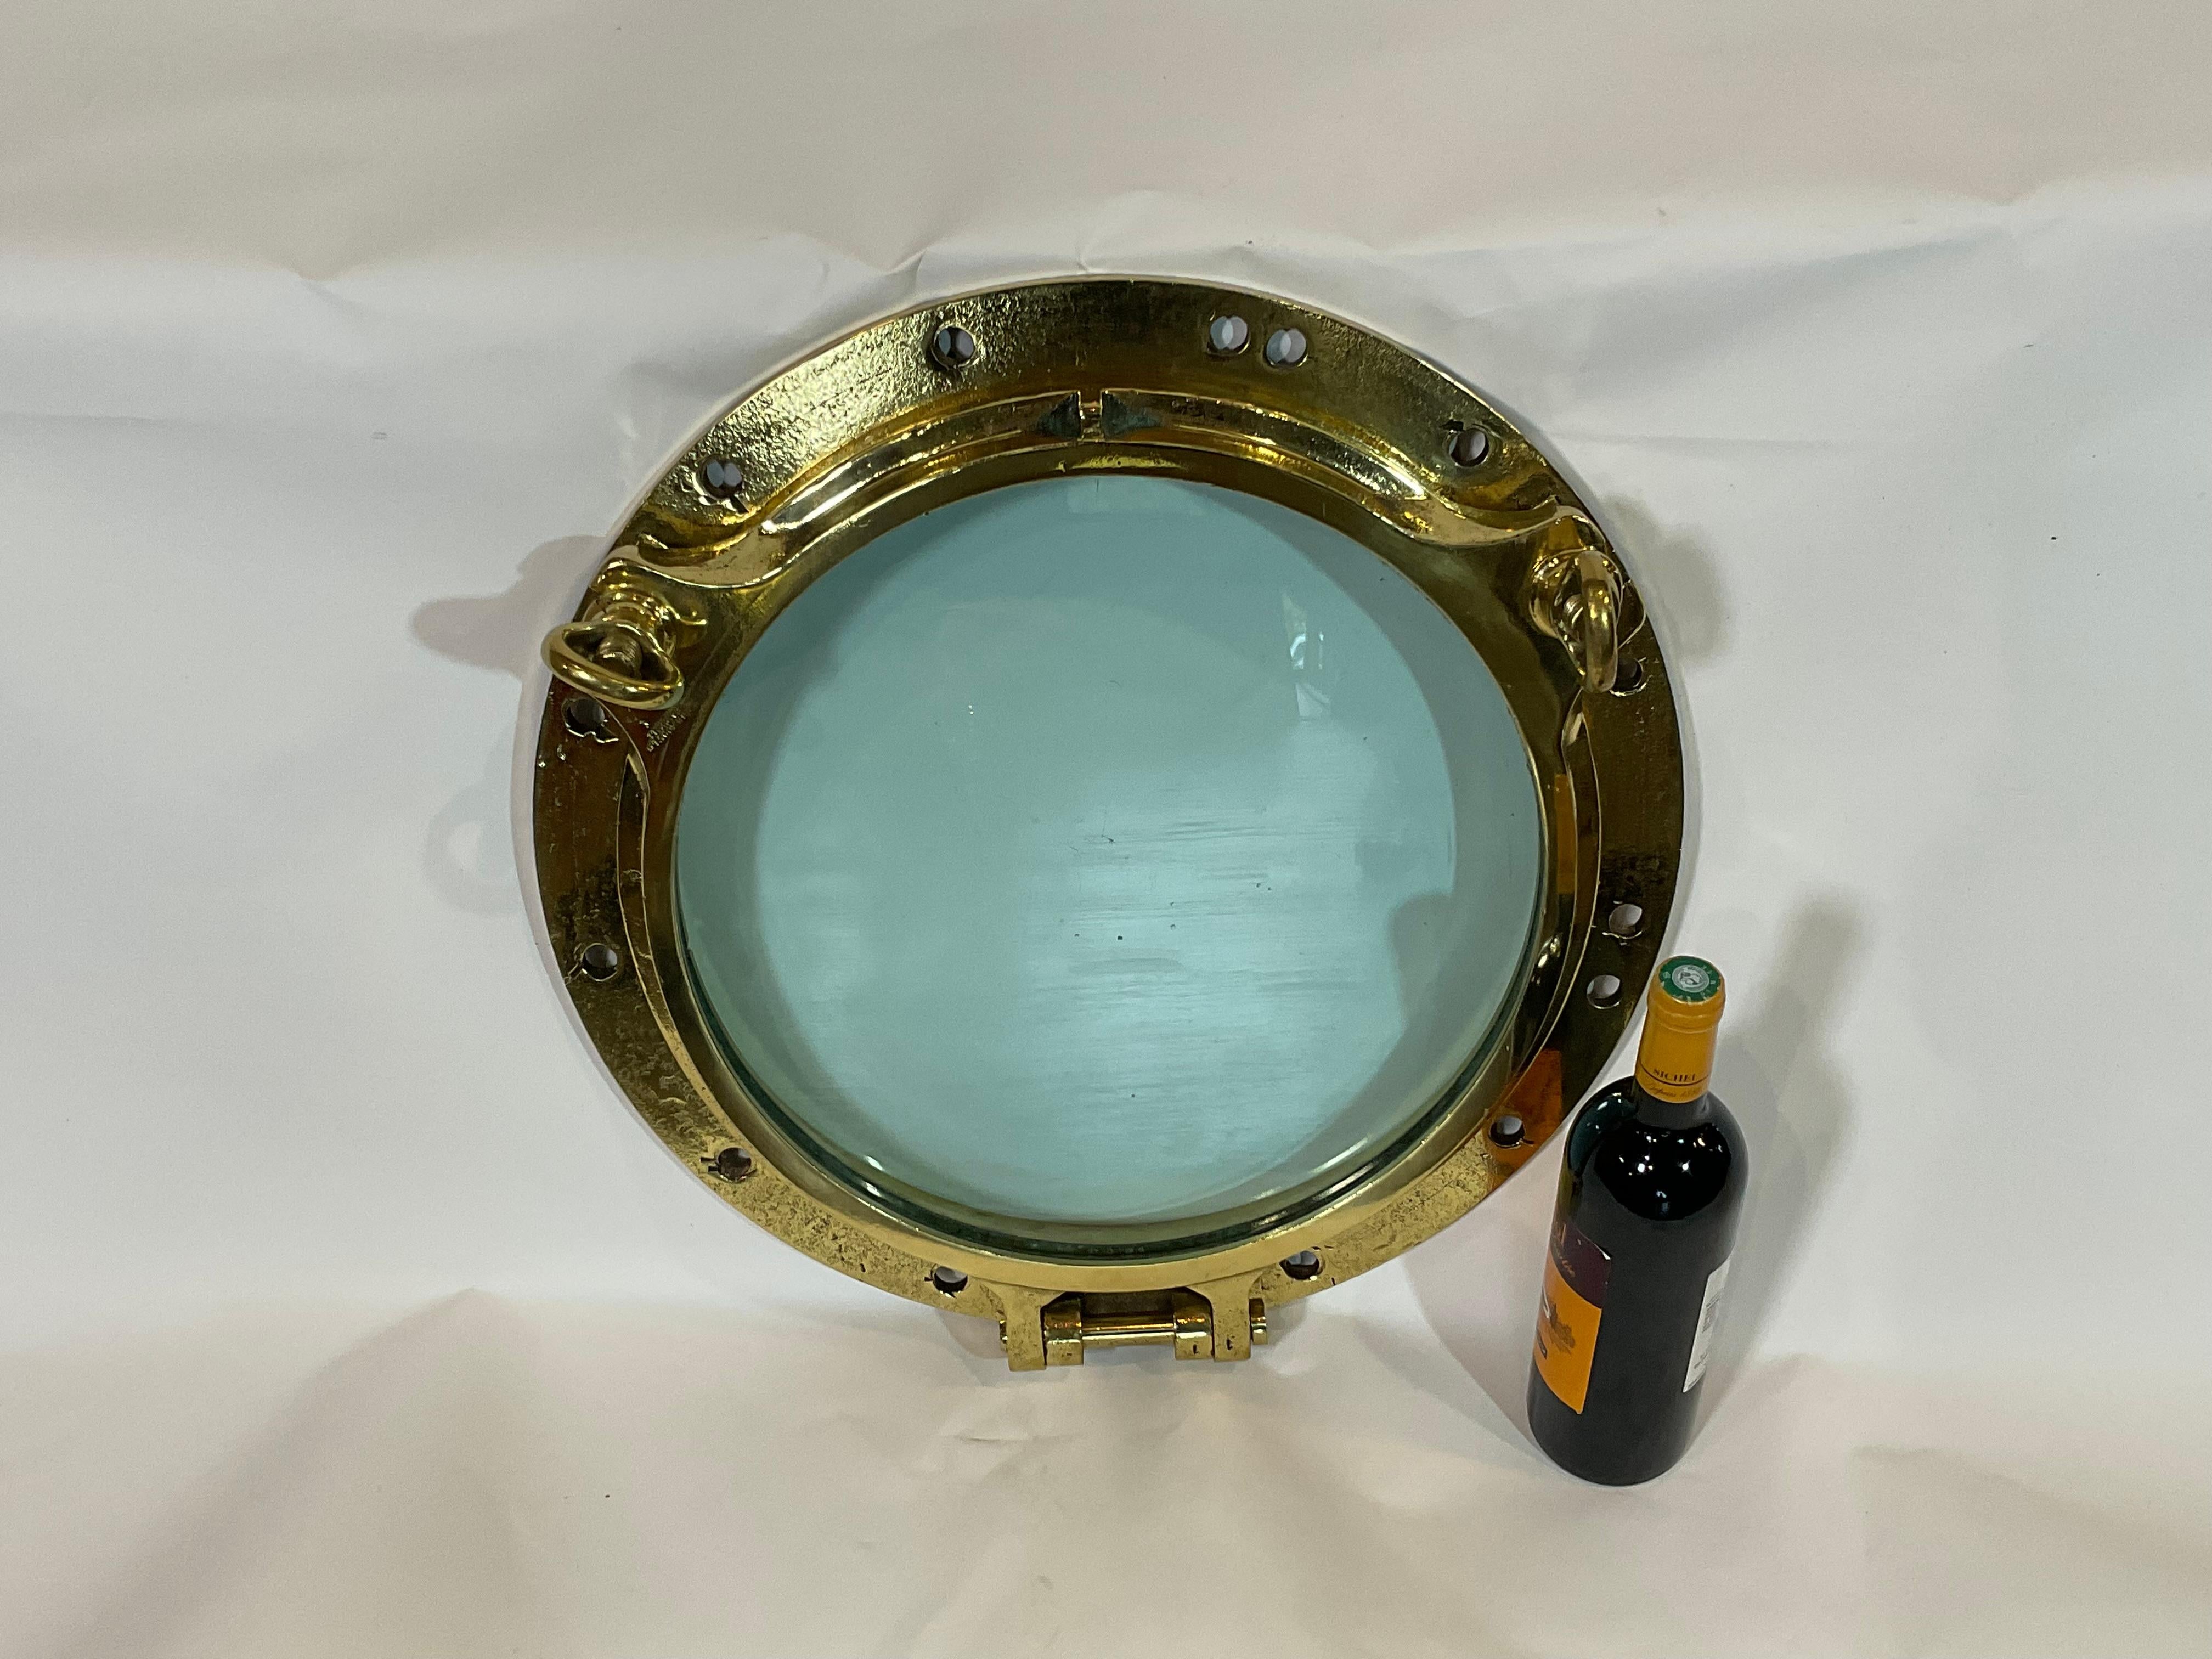 Highly polished ships porthole of solid brass with lacquer finish. Fitted with glass. This is by John Roby Limited of Rainhill. Roby produced portholes for the grand liner including Titanic.

Weight: 45 LBS
Overall dimensions: 5” height x 20”